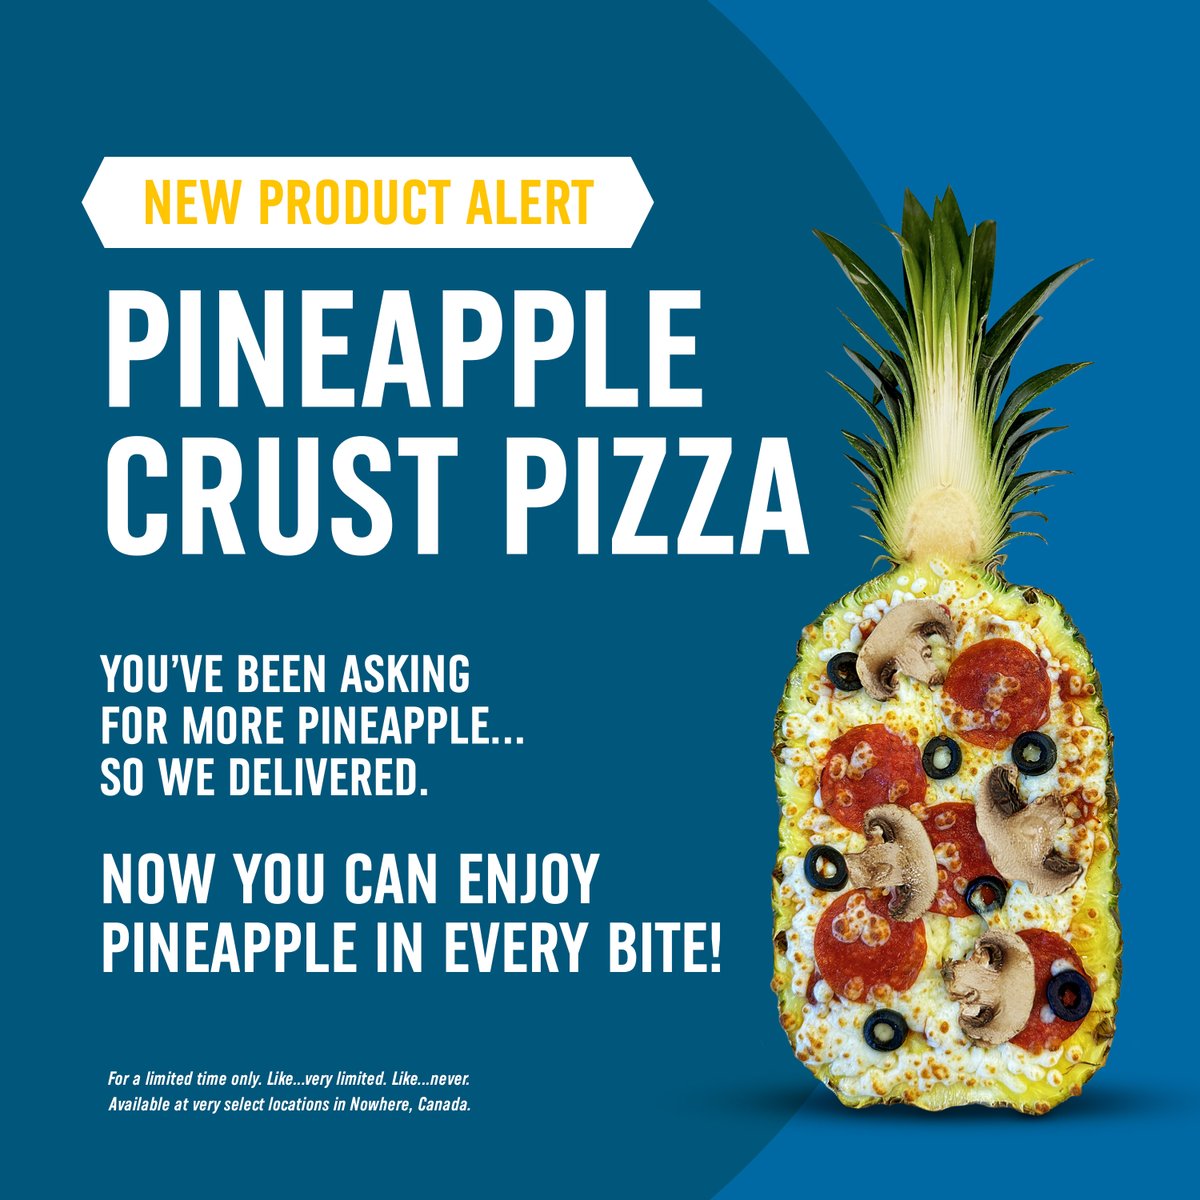 Introducing Pineapple Crust Pizza! 🍕🍍 We know how much you all love Pineapple on Pizza, So now we made it so you can enjoy Pizza on Pineapple! Order today!